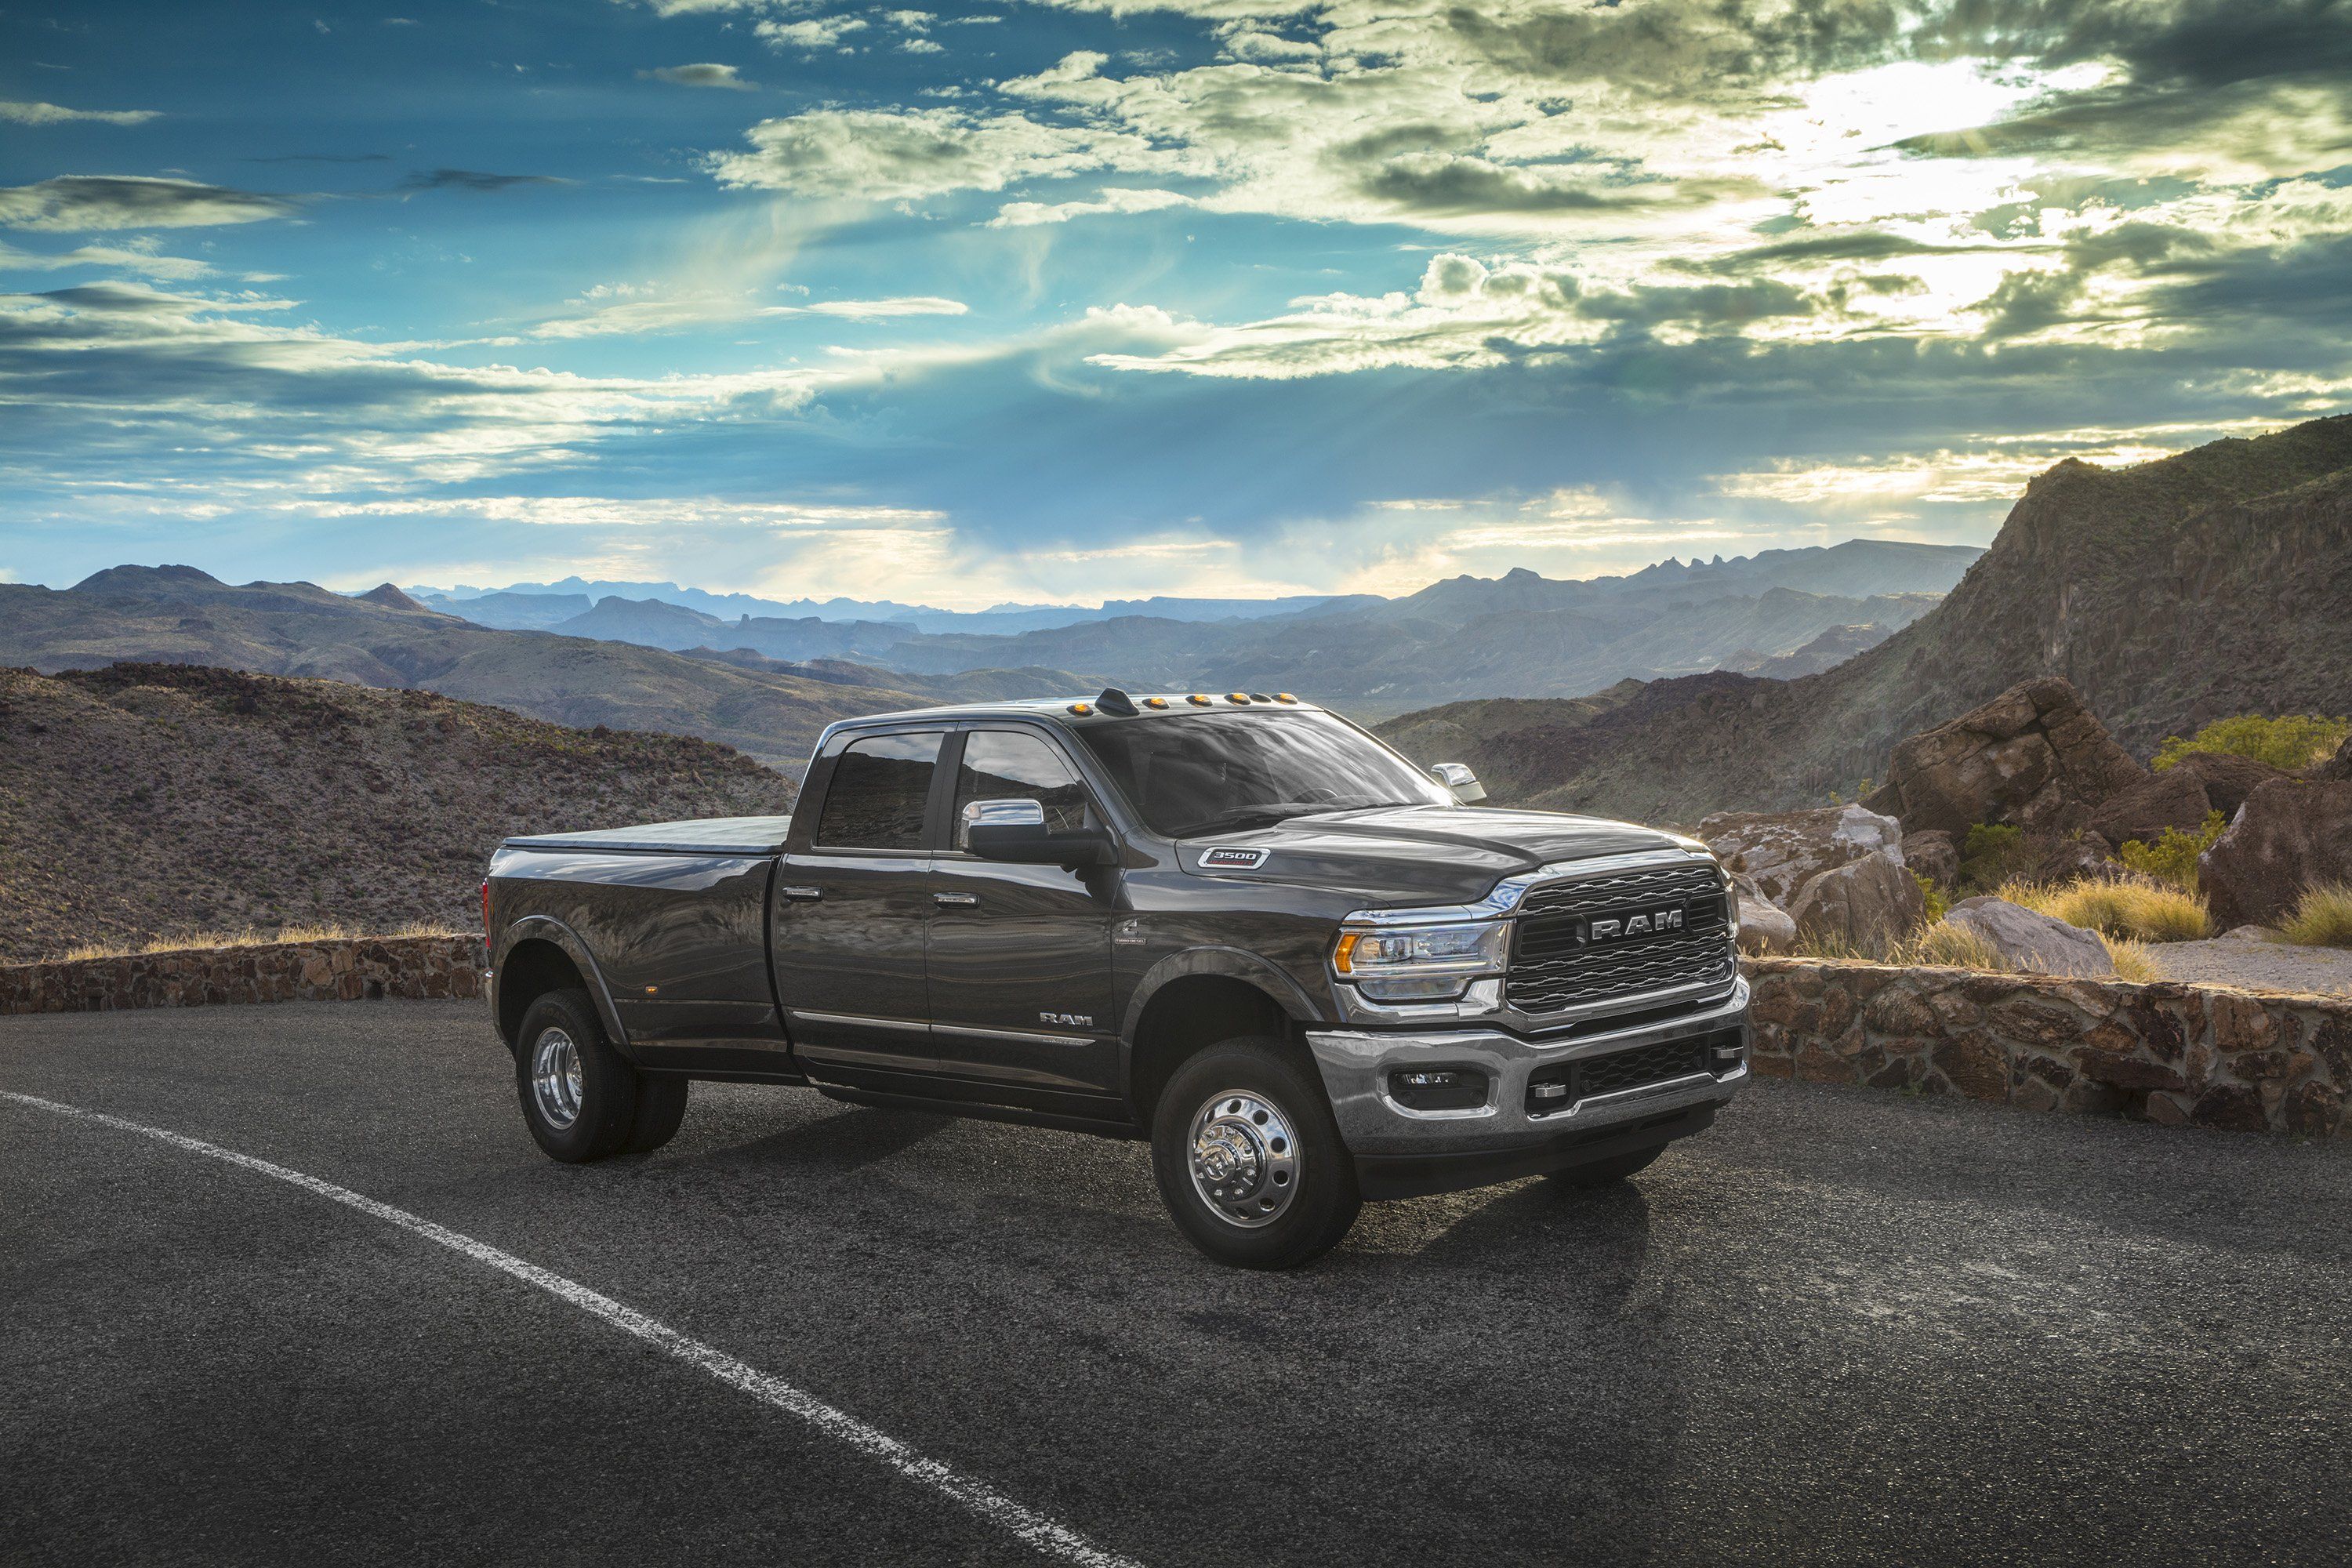 Free download 2019 Ram 3500 Heavy Duty Limited Crew Cab Dually Wallpaper 28 [3000x2000] for your Desktop, Mobile & Tablet. Explore 2020 Ram 3500 Wallpaper. Ram Wallpaper, Dodge Ram Wallpaper, Ram Logo Wallpaper